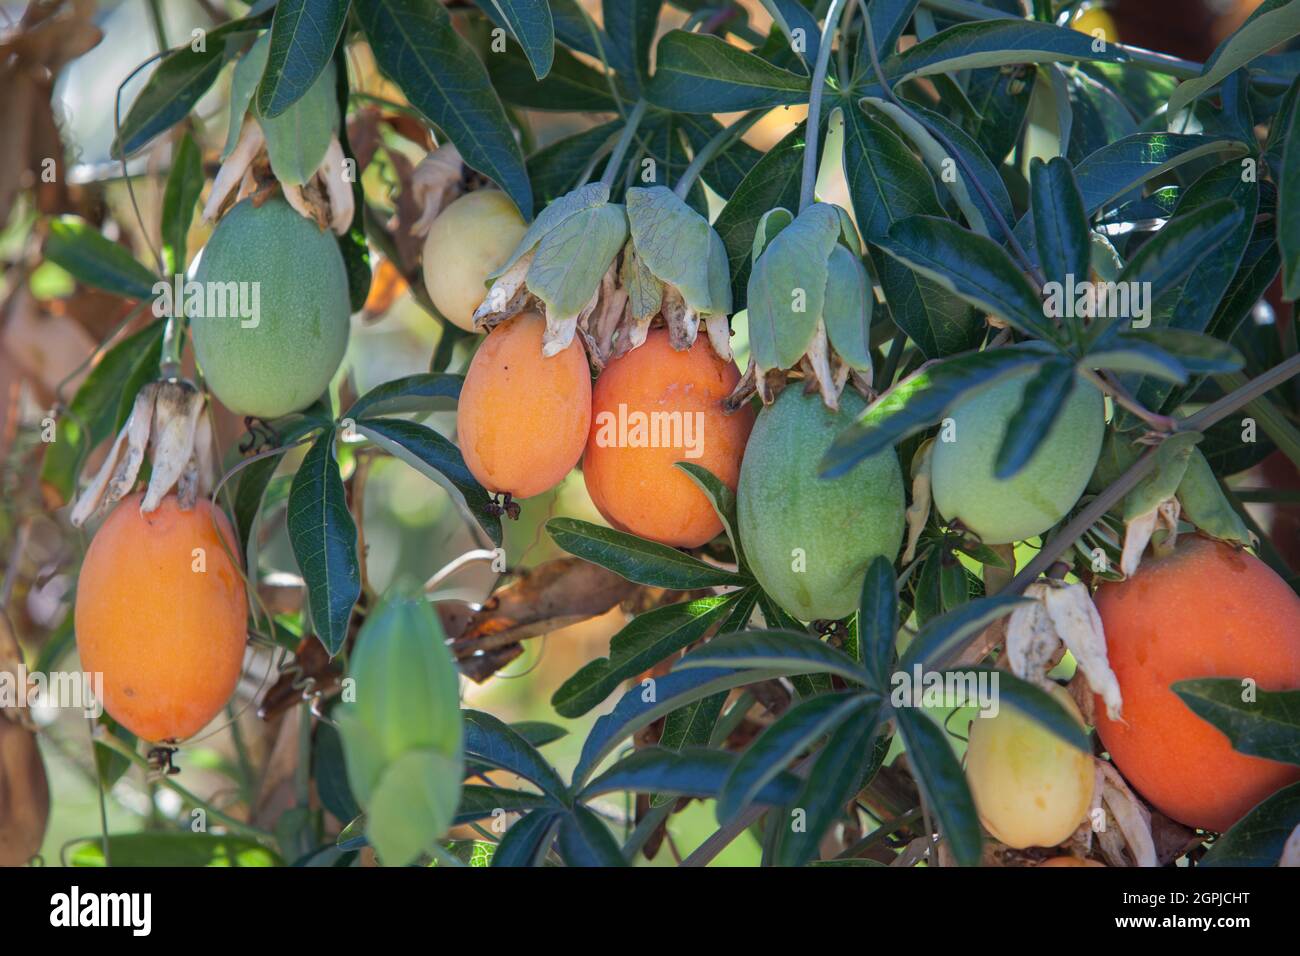 Loquat leaves and fruits. Mature and immature items Stock Photo